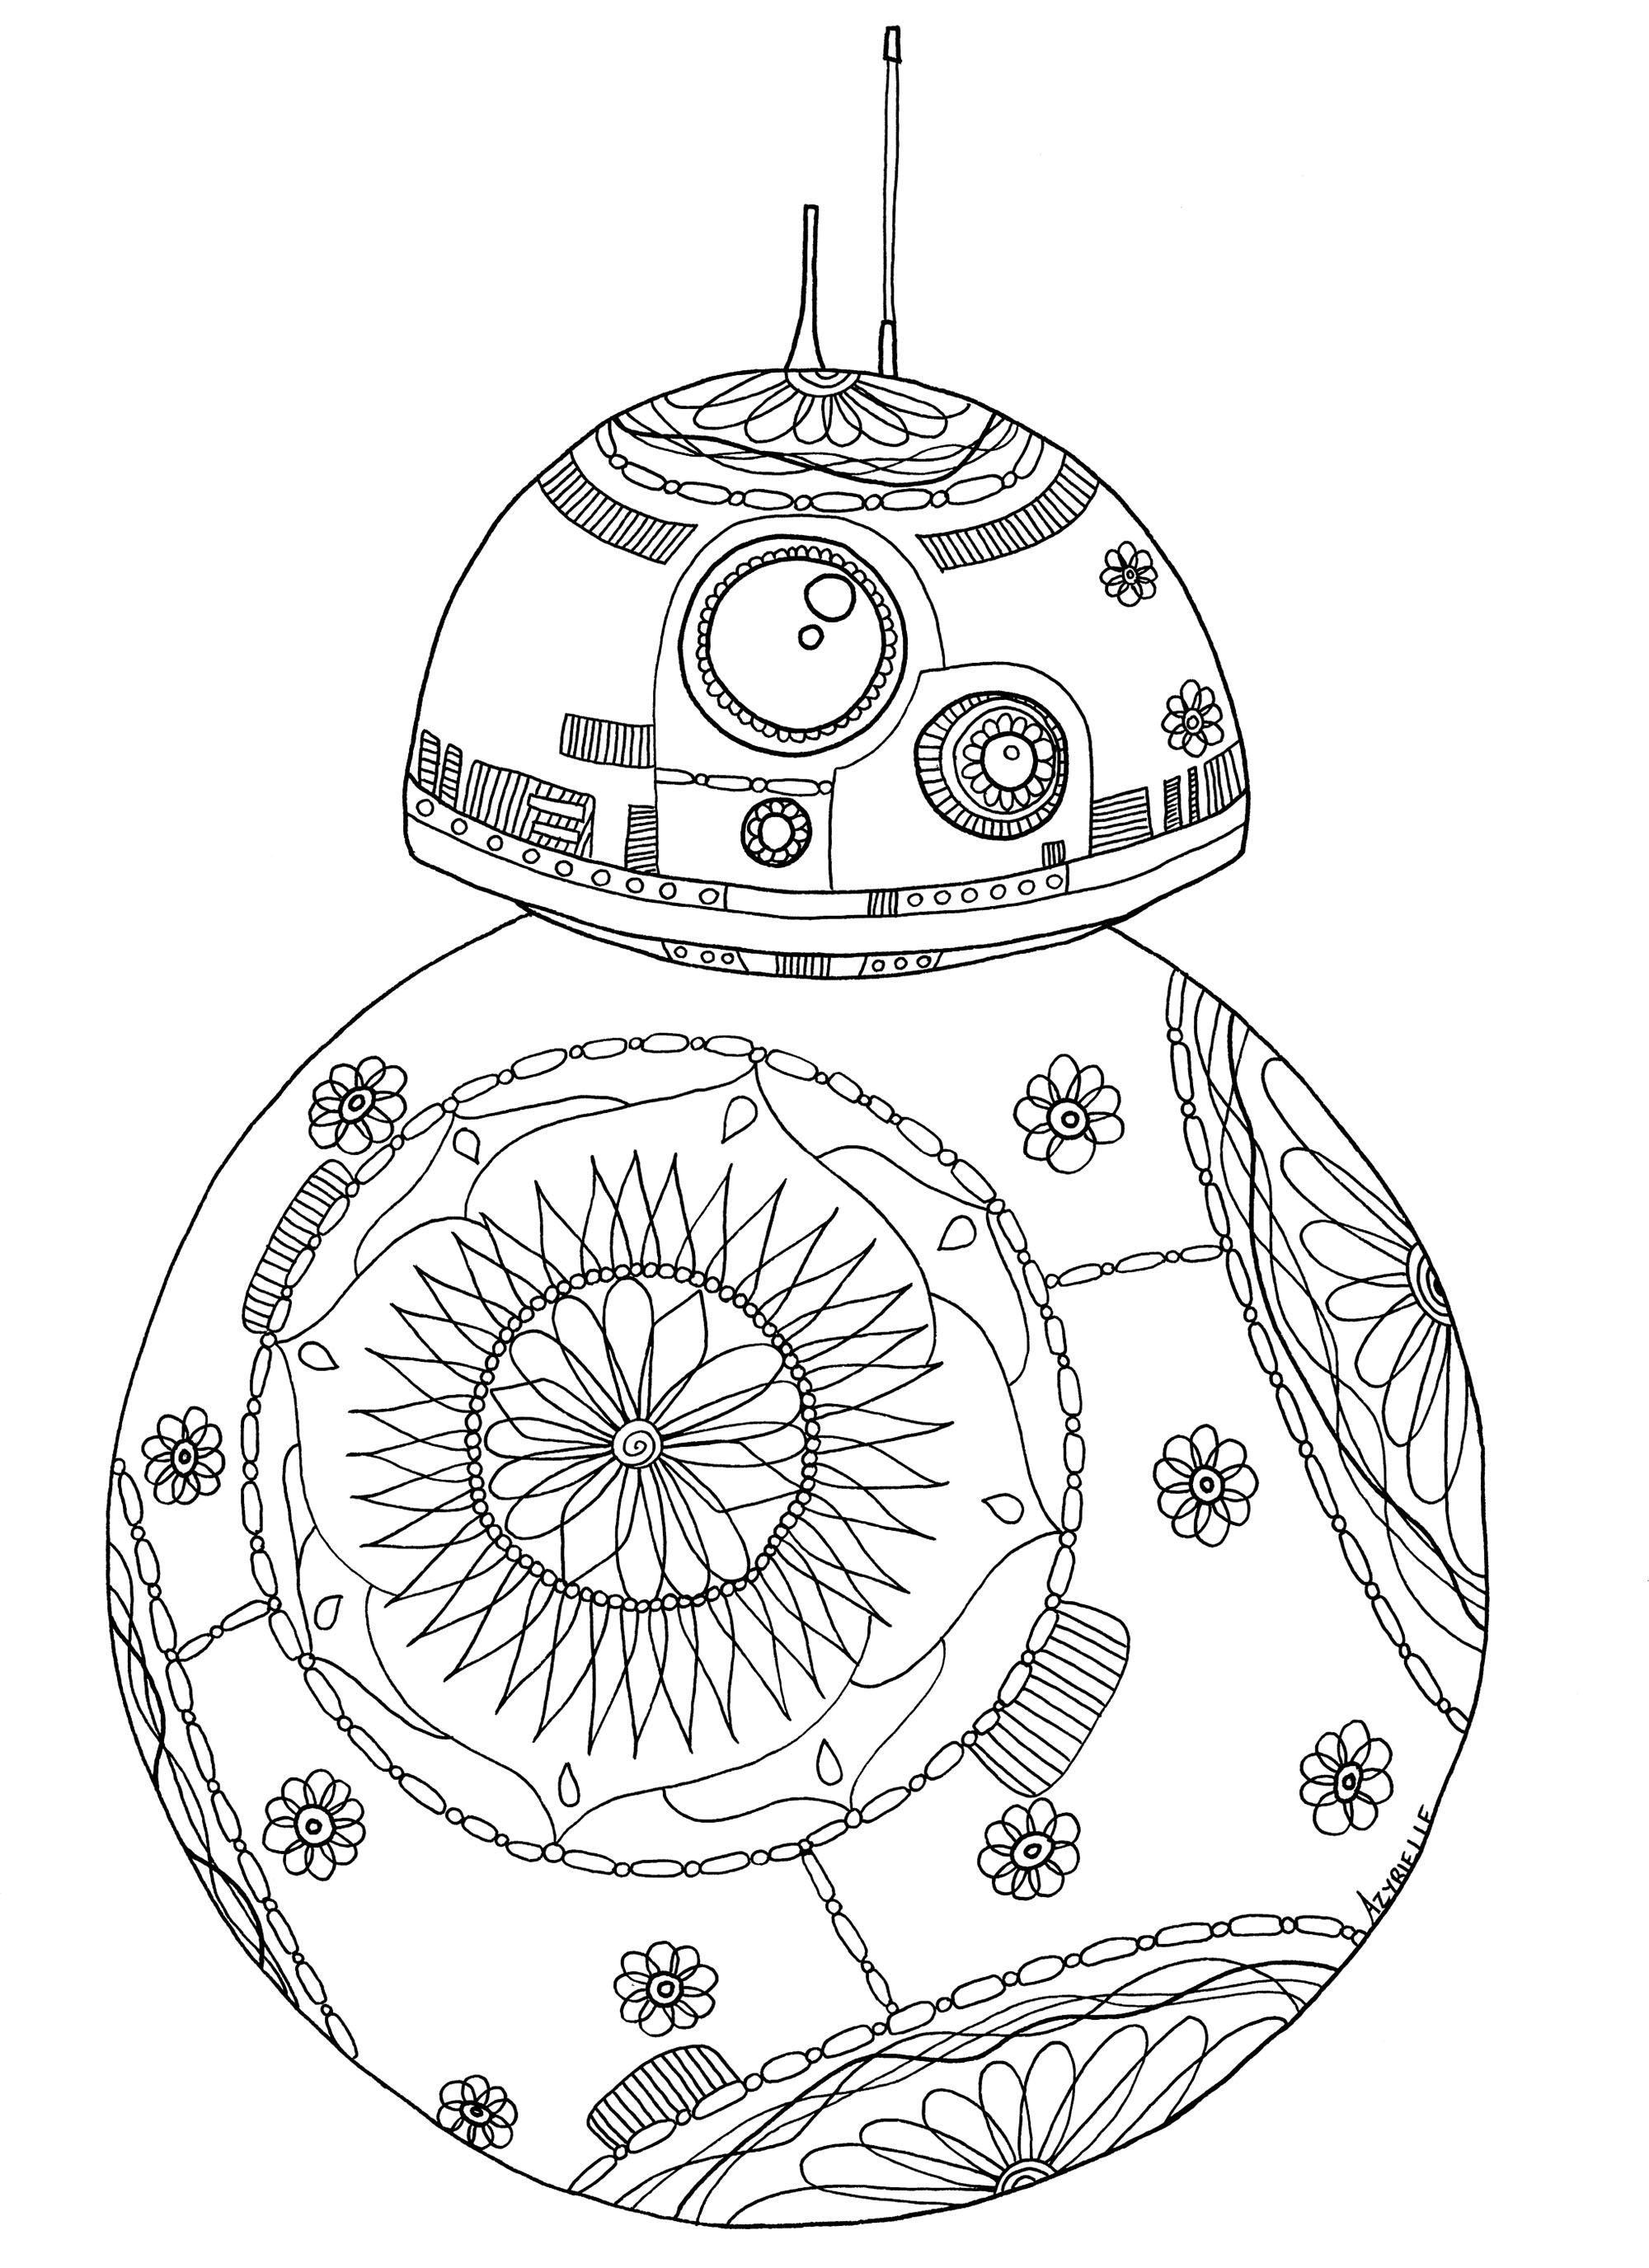 Sphero's Star Wars BB-8 Droid with cute flowered patterns, Artist : Azyrielle